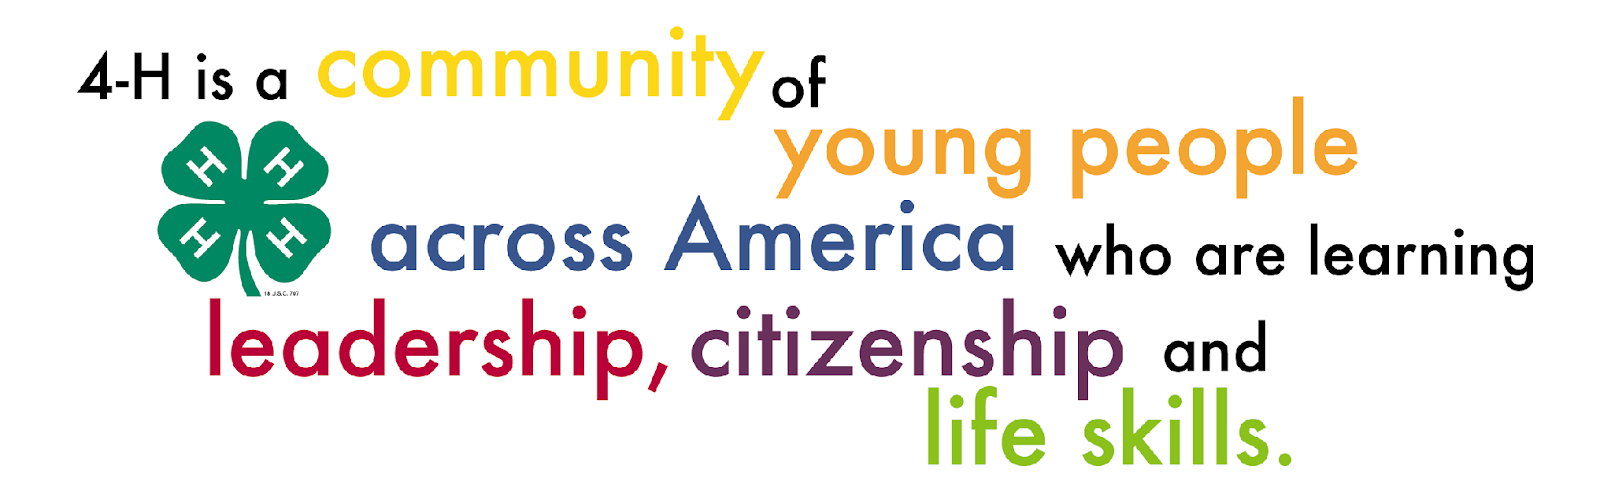 4-H is a community of young people across America who are learning leadership, citizenship and life skills